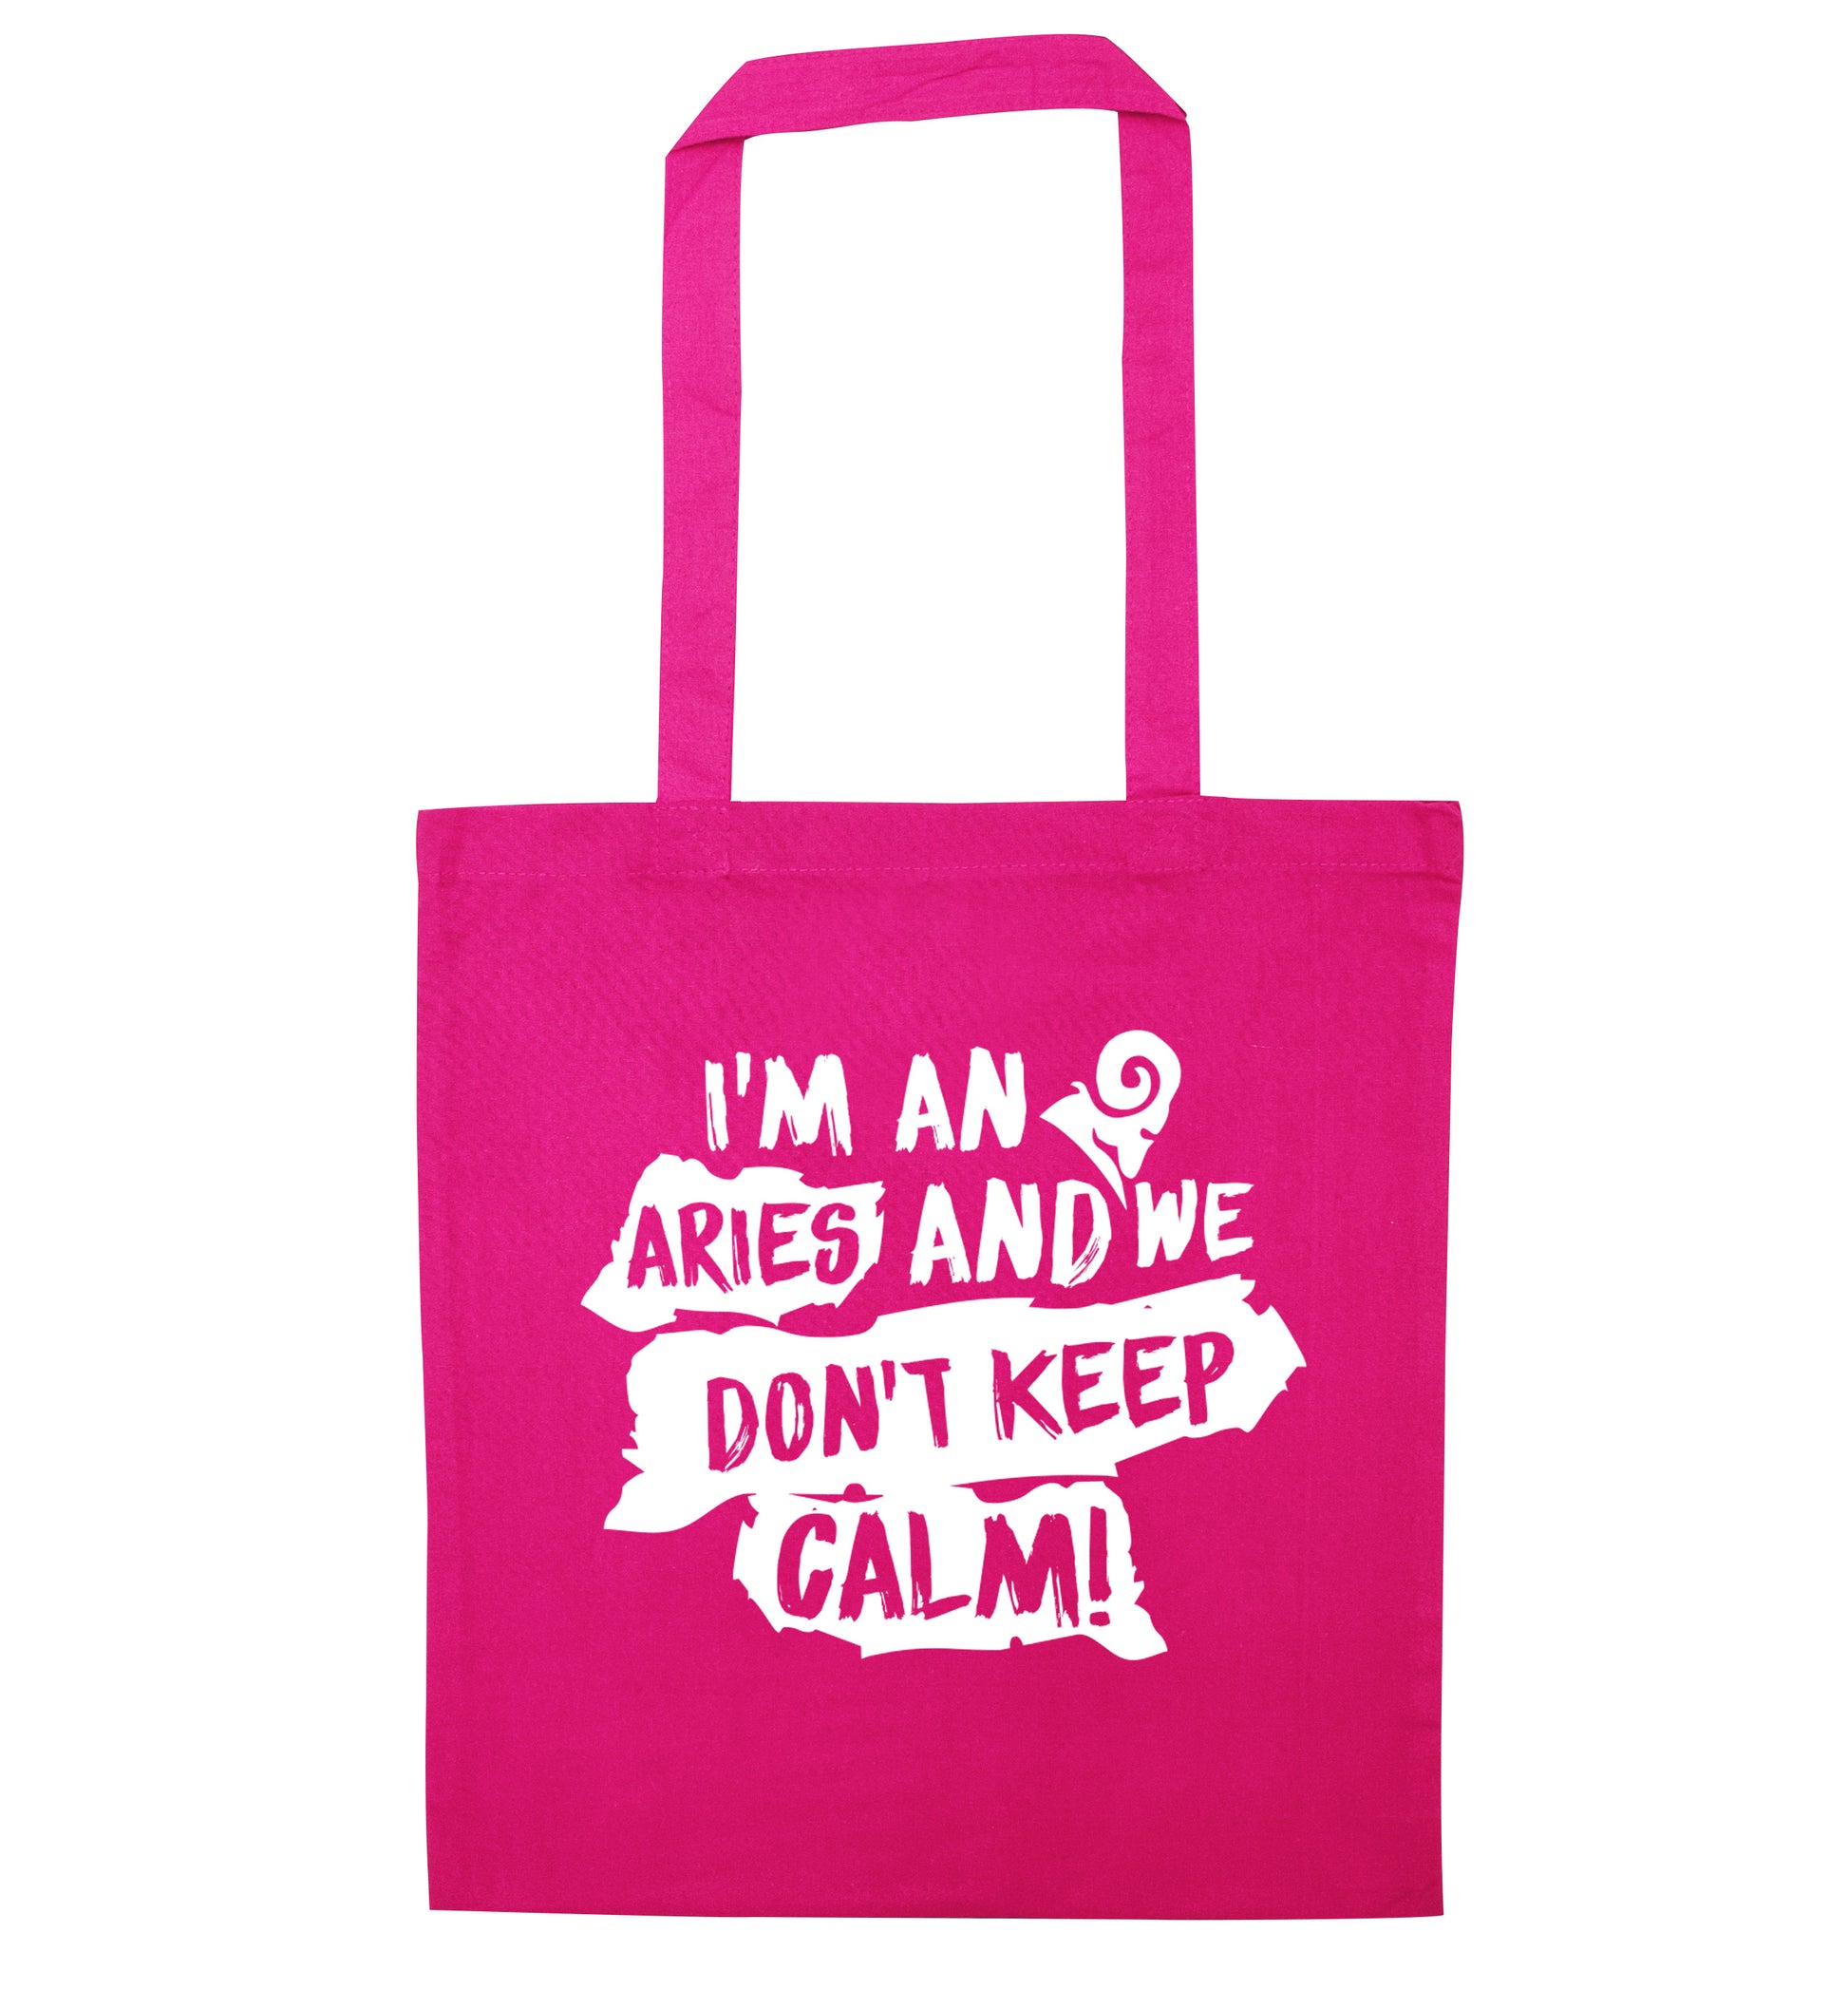 I'm an aries and we don't keep calm pink tote bag